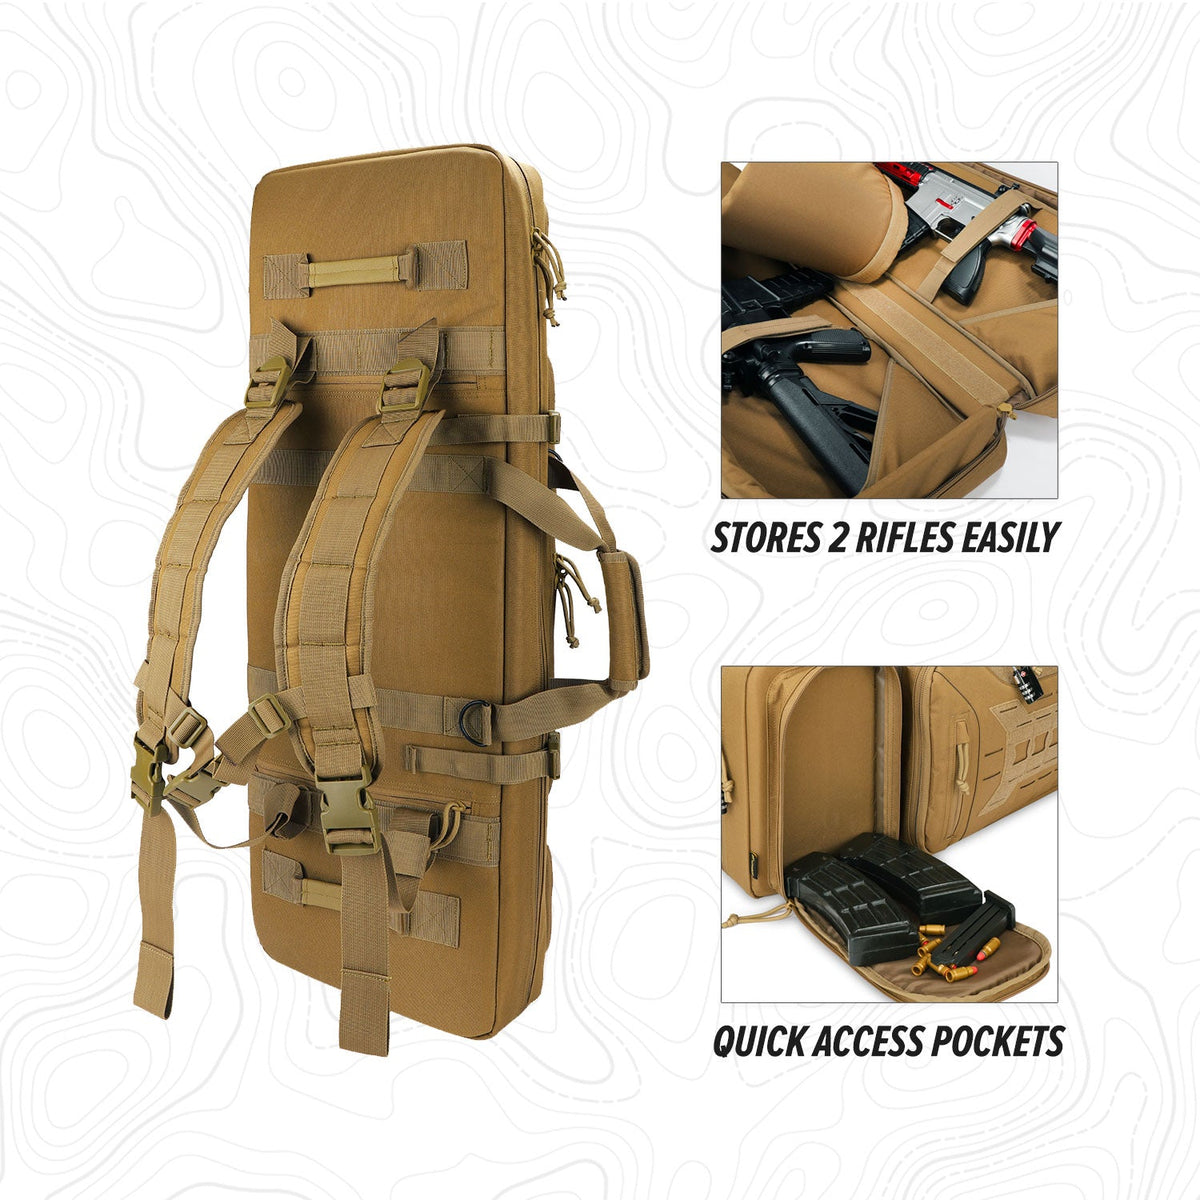 2Tactic - Tactical Rifle Case